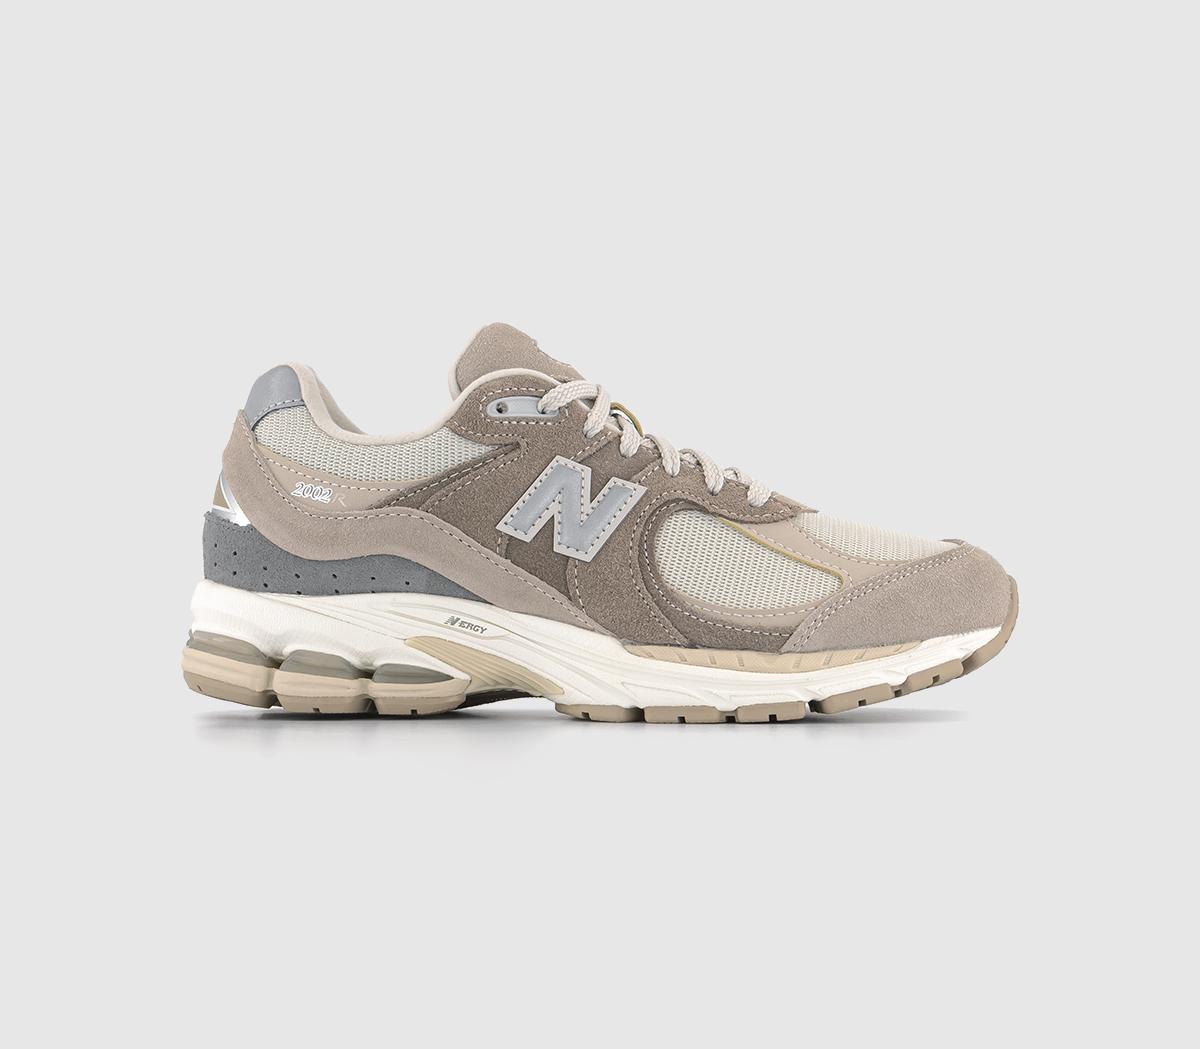 New Balance2002R Trainers Driftwood Cream Grey Offwhite